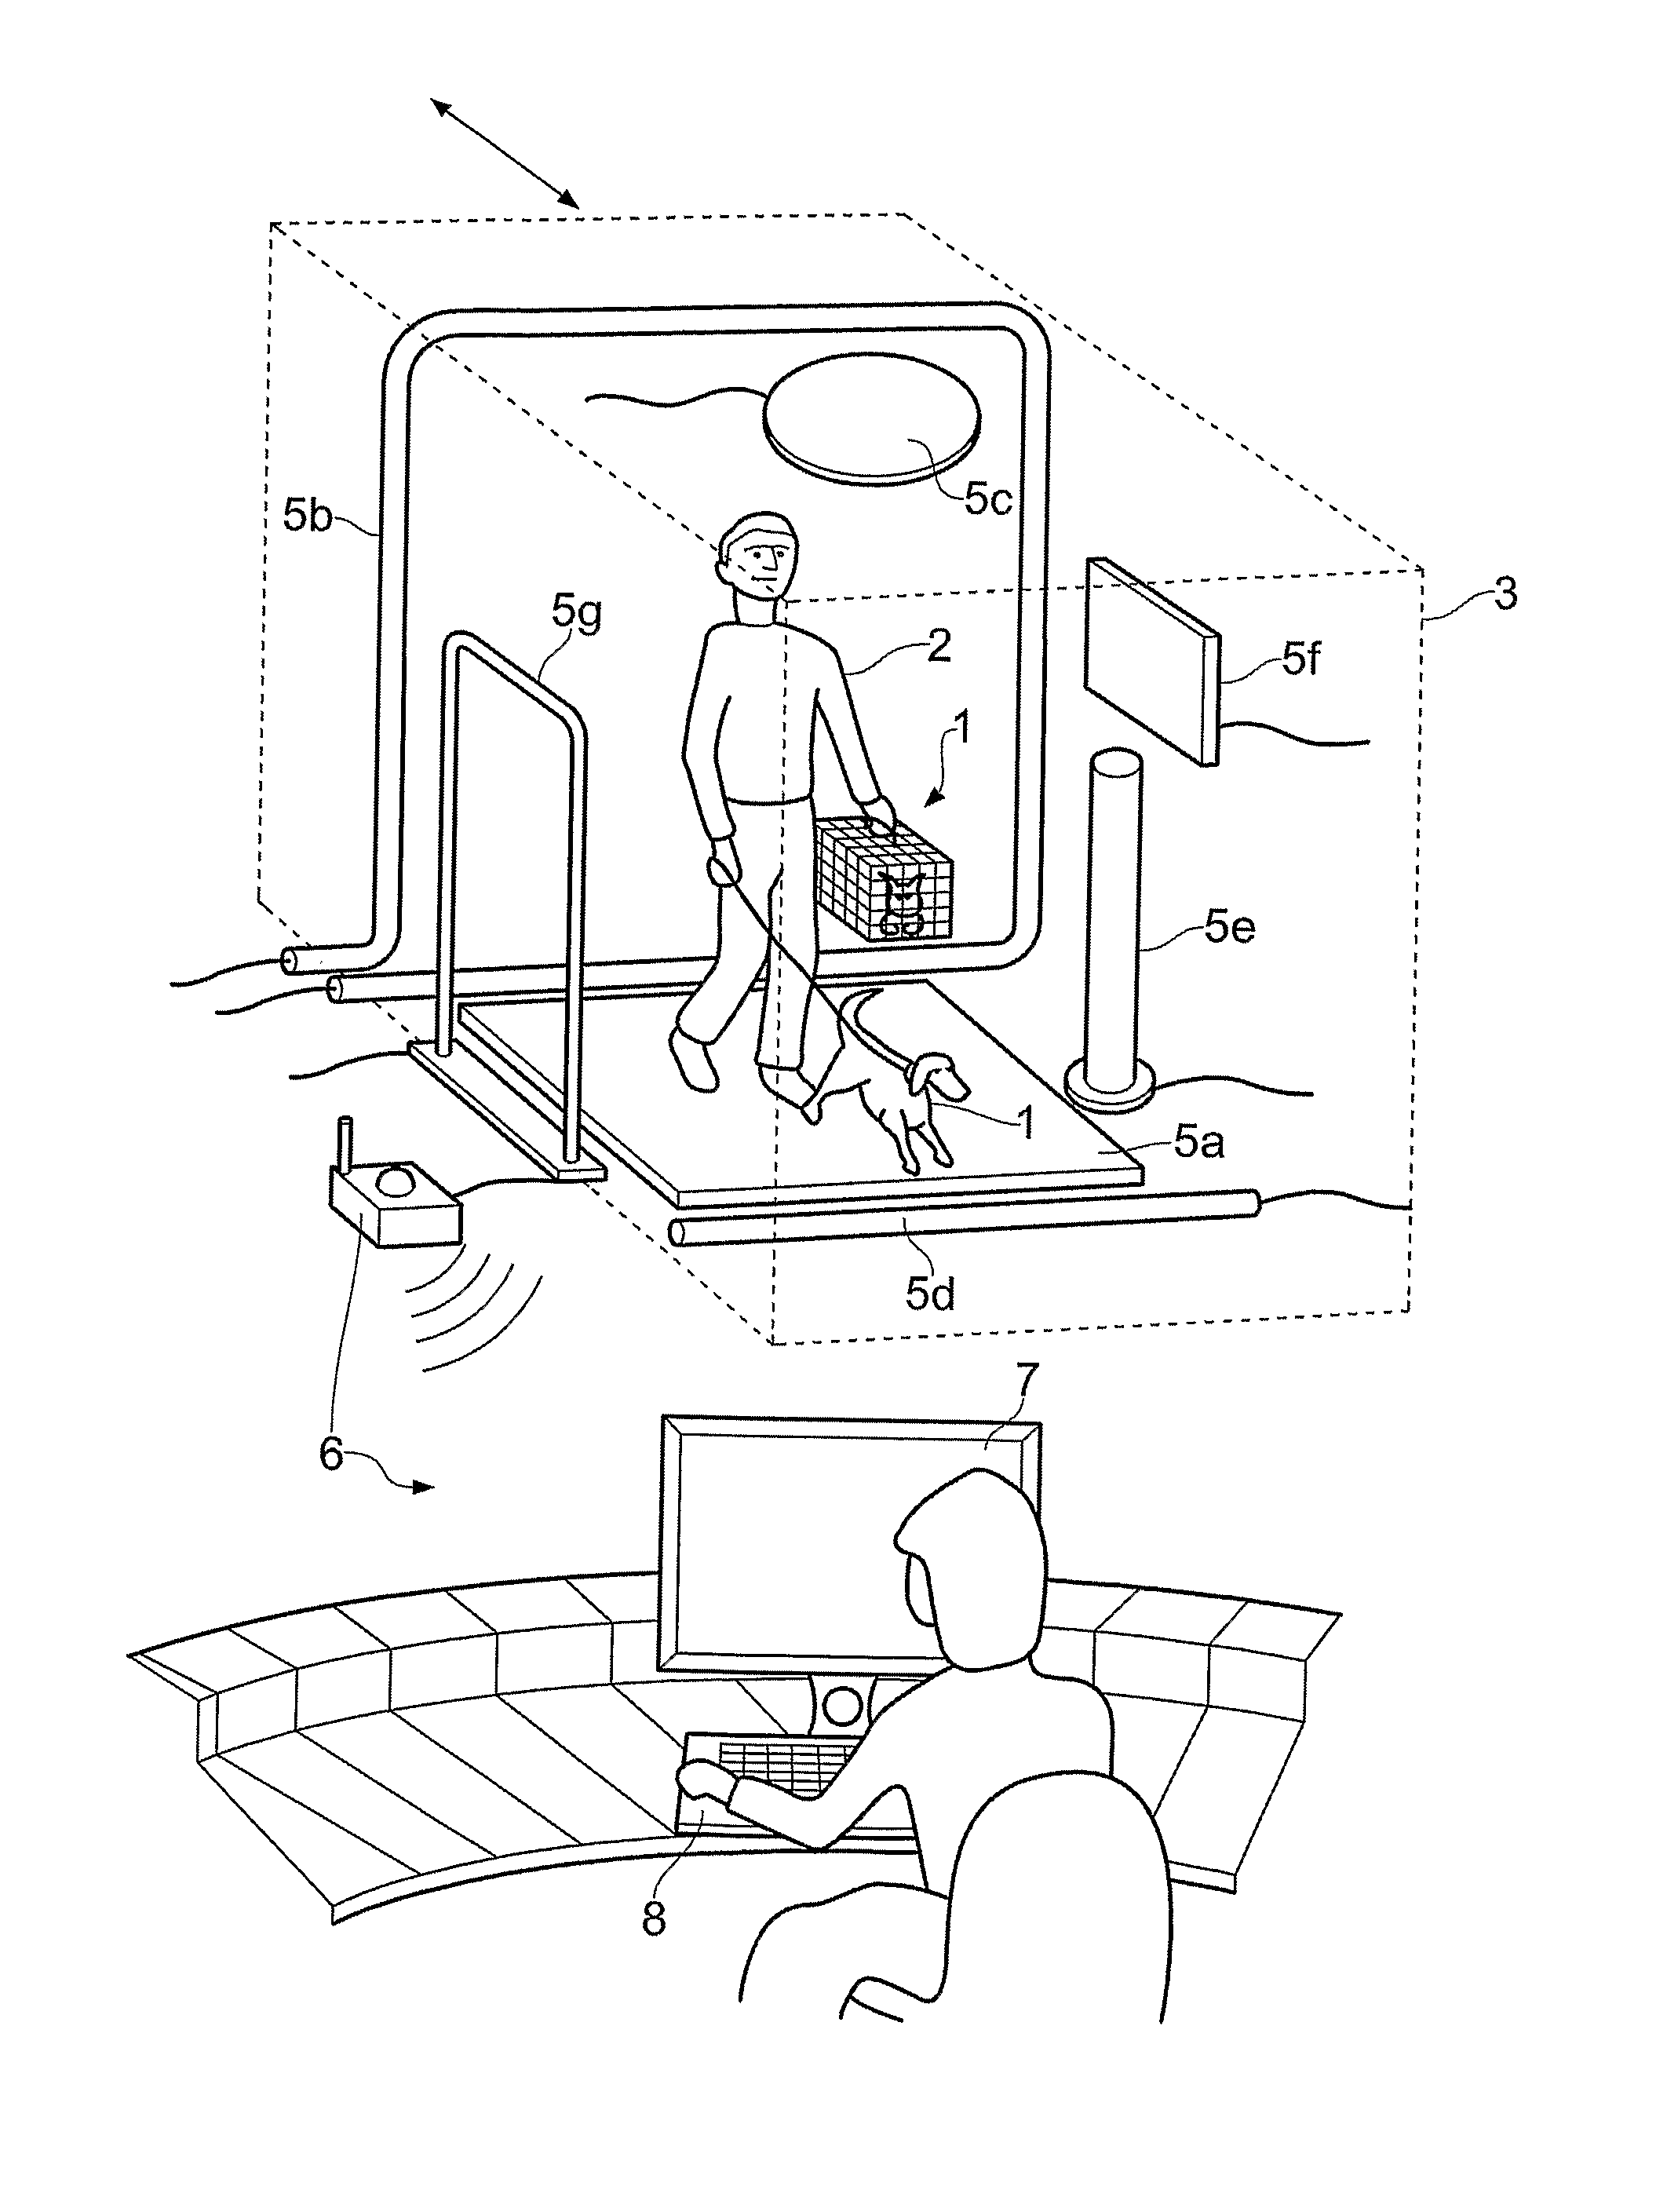 Animal identification system and related method